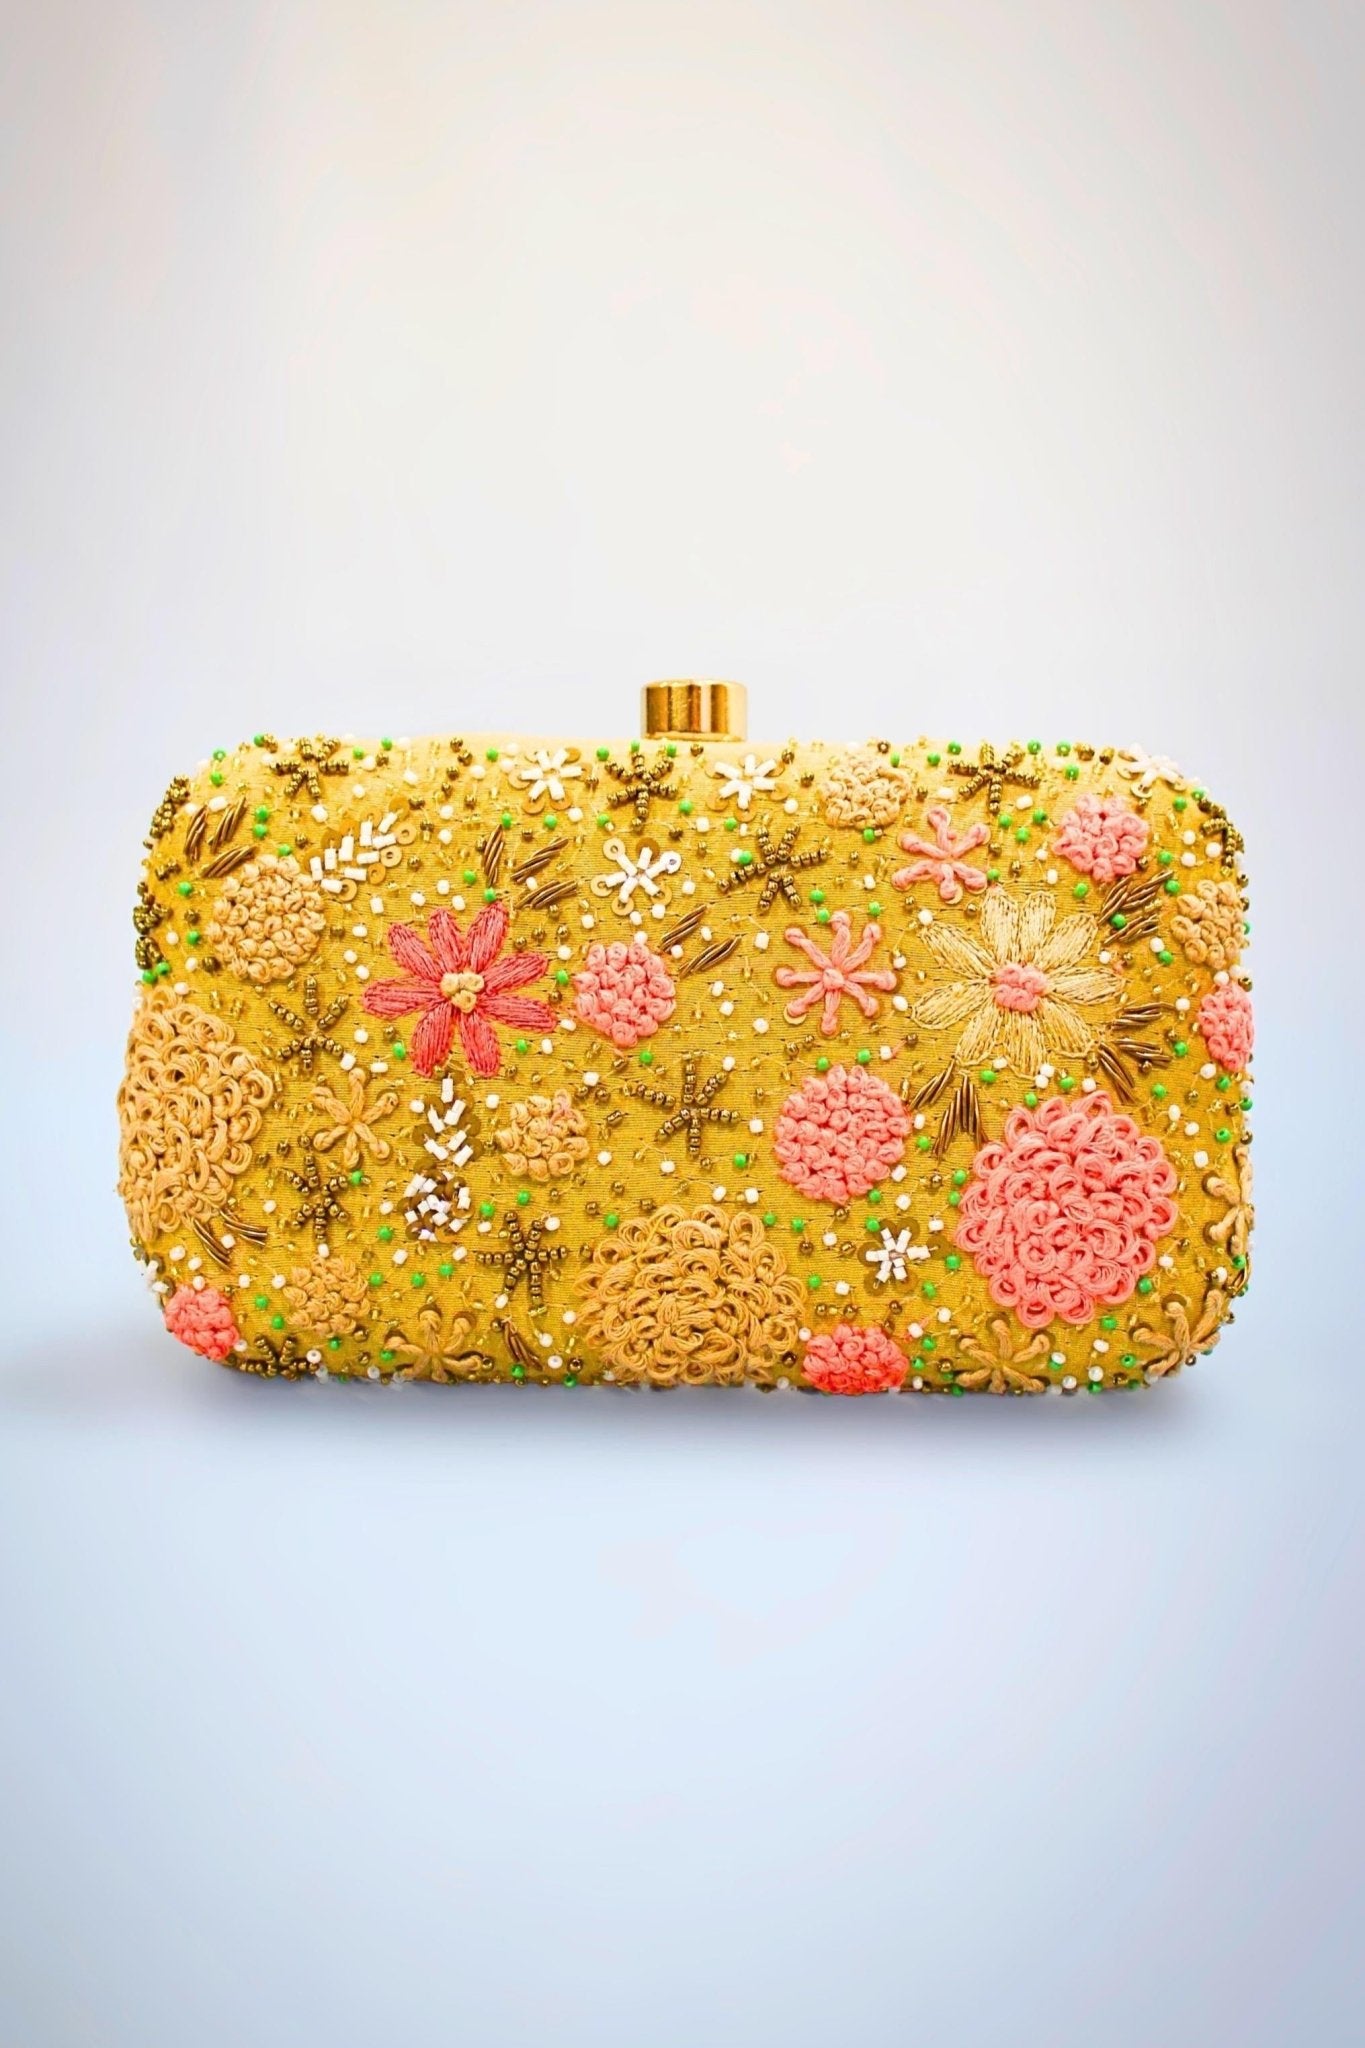 Yellow Clutch Canvas Lined Bag - 25x18 cm